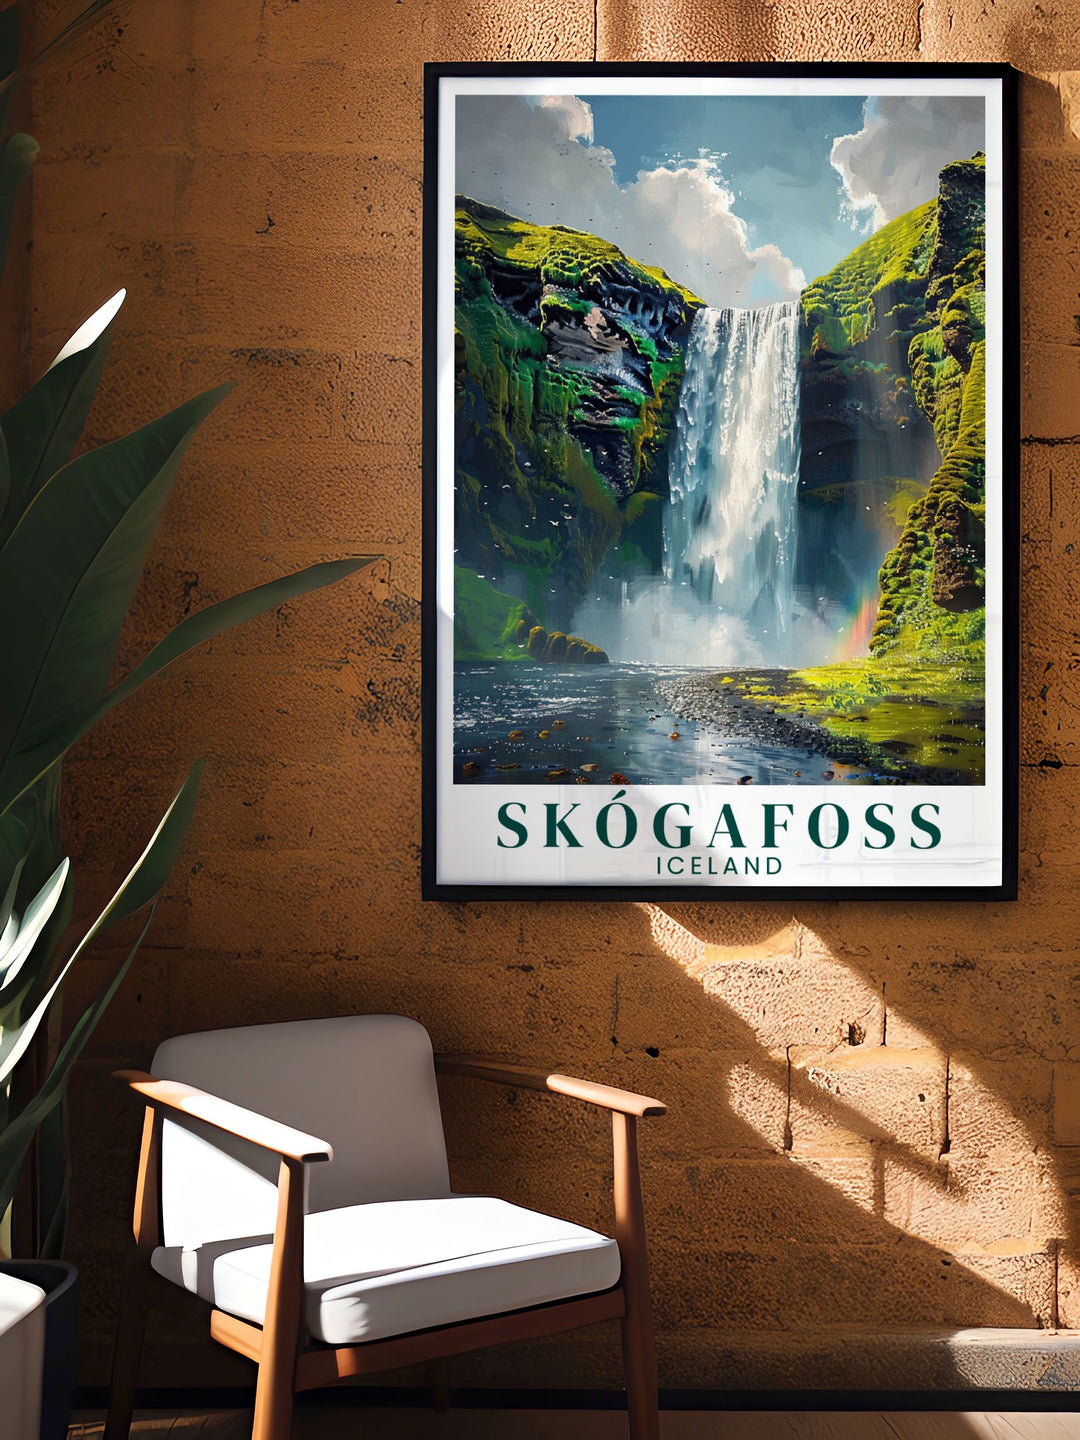 Skogafoss waterfall bucket list print highlighting the beauty of one of Iceland's most visited landmarks perfect for inspiring your next travel adventure and adding to your art collection.